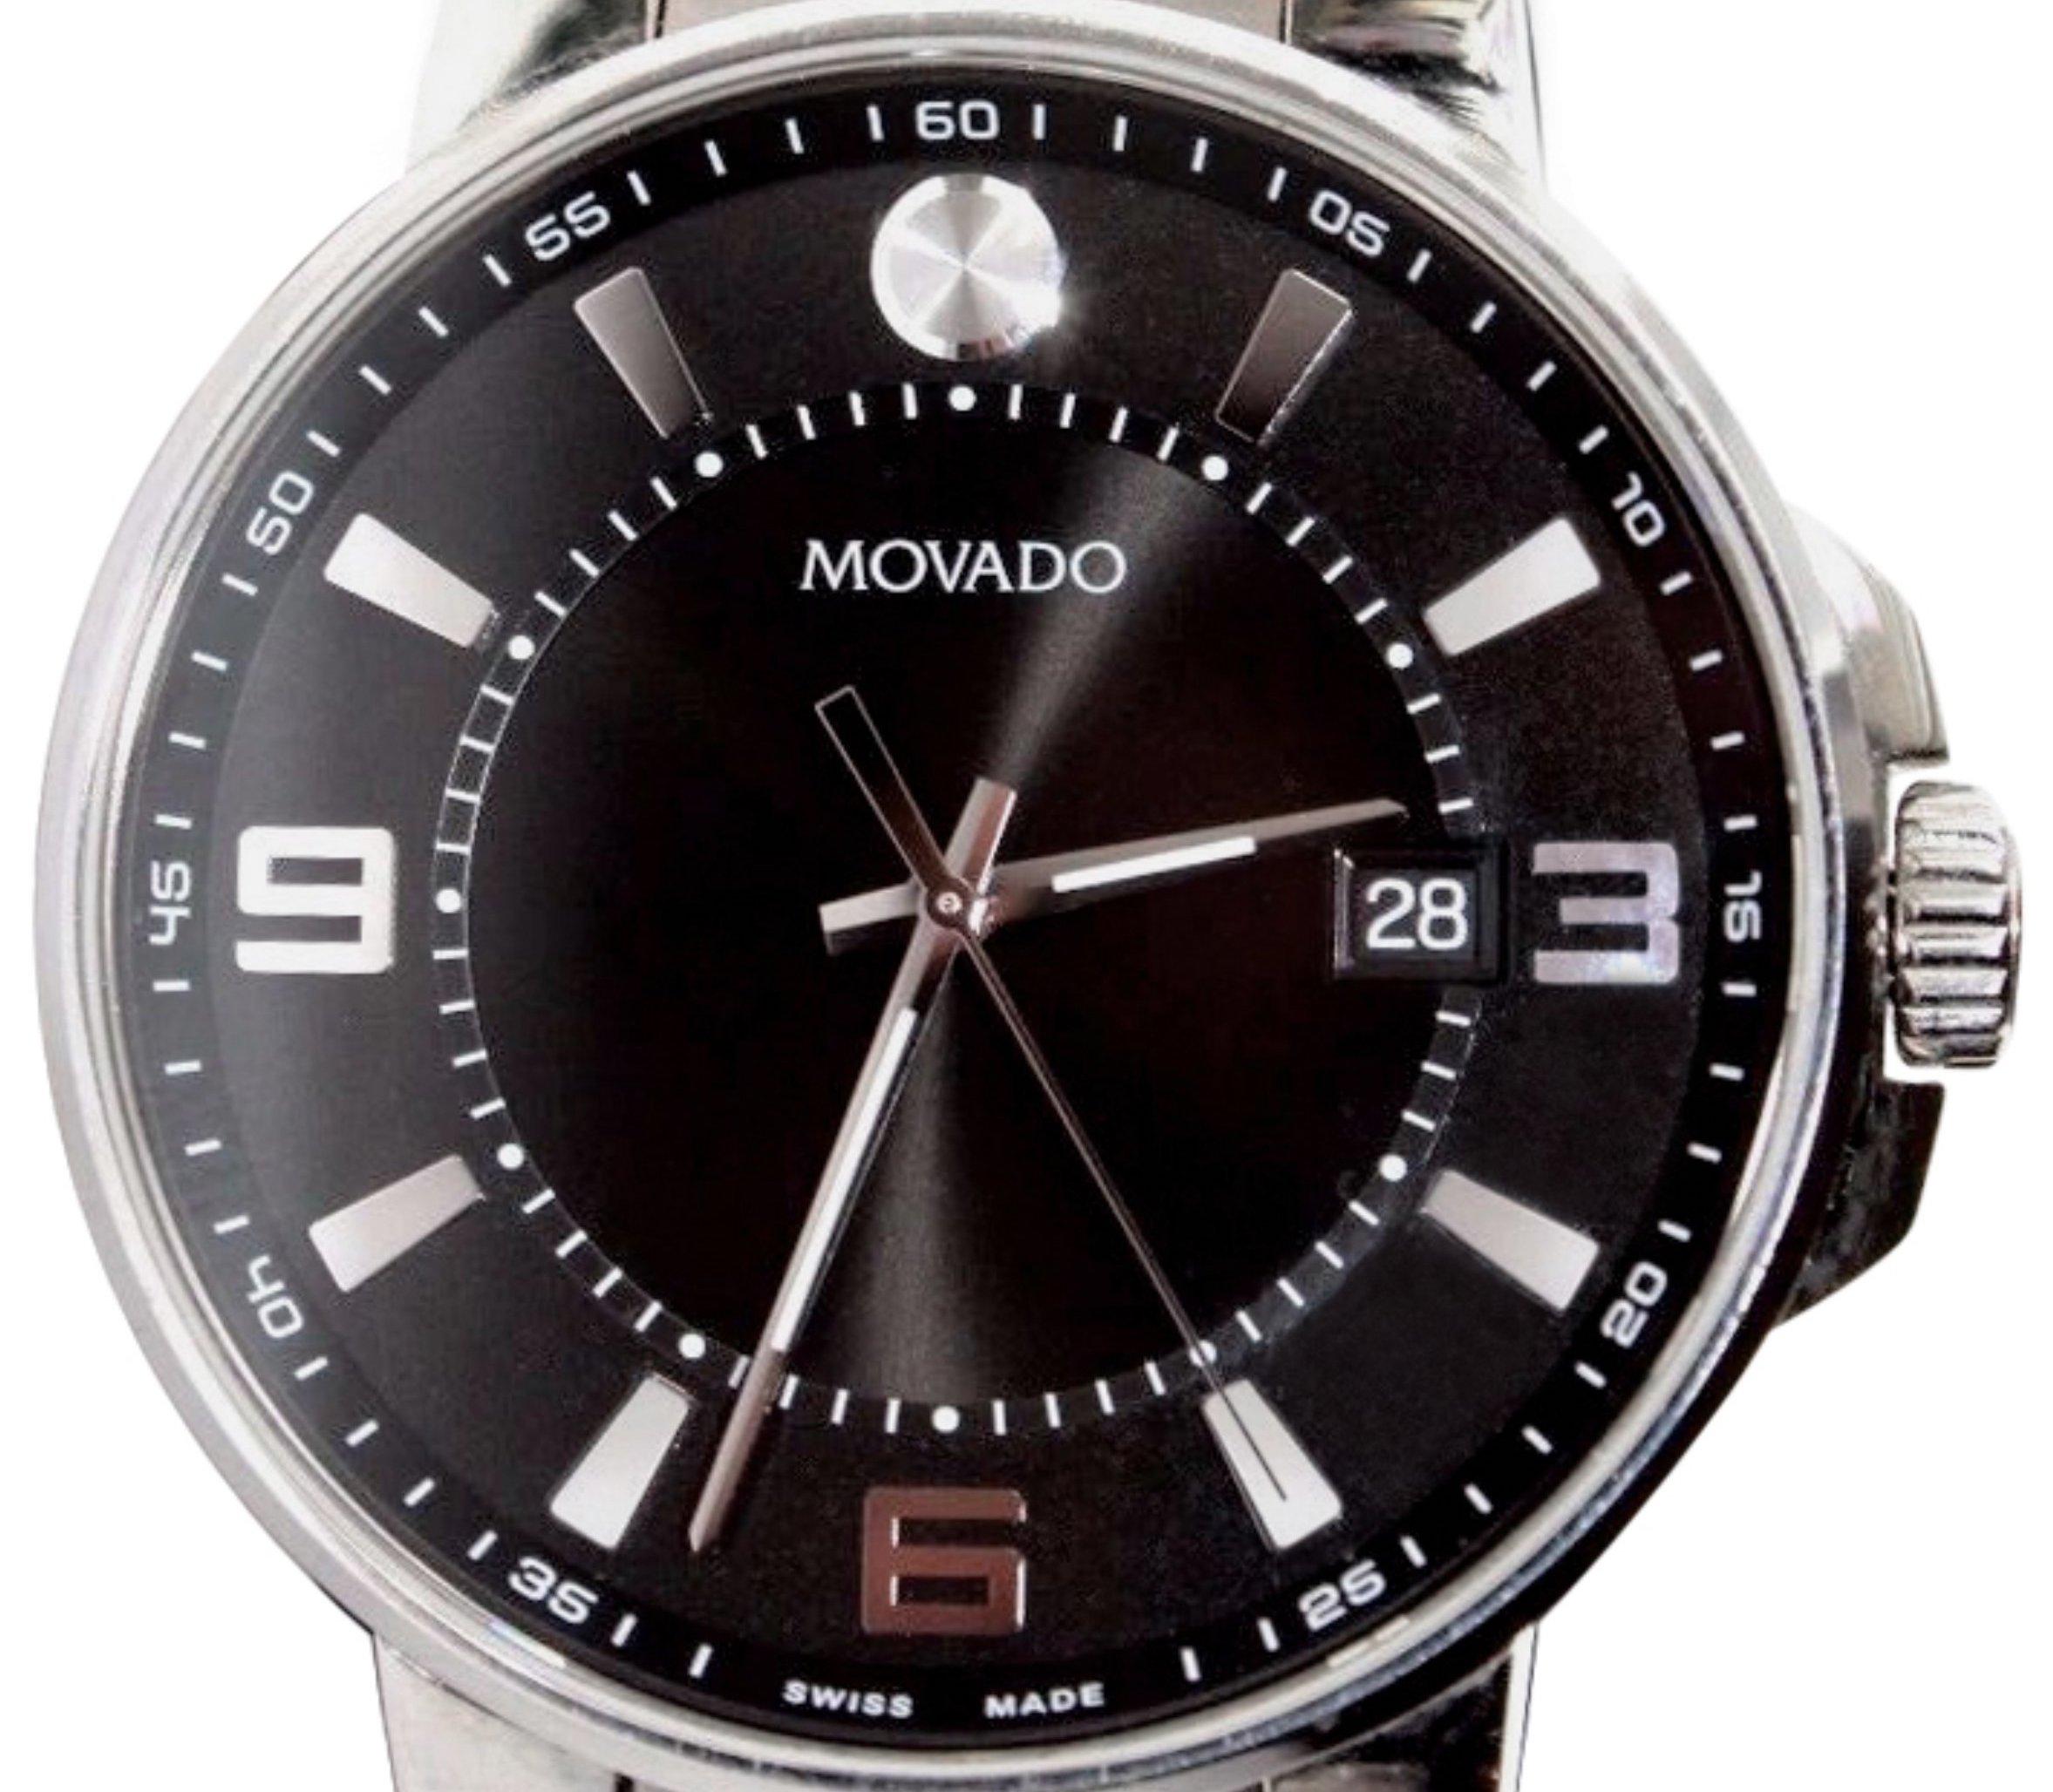 This simple and elegant Movado SE Pilot men’s watch is powered by a Swiss Quartz movement encased in a stainless-steel body. The clasp of the watch utilizes a dual pushbutton deployment clasp for secure opening and closing. The round watch face is